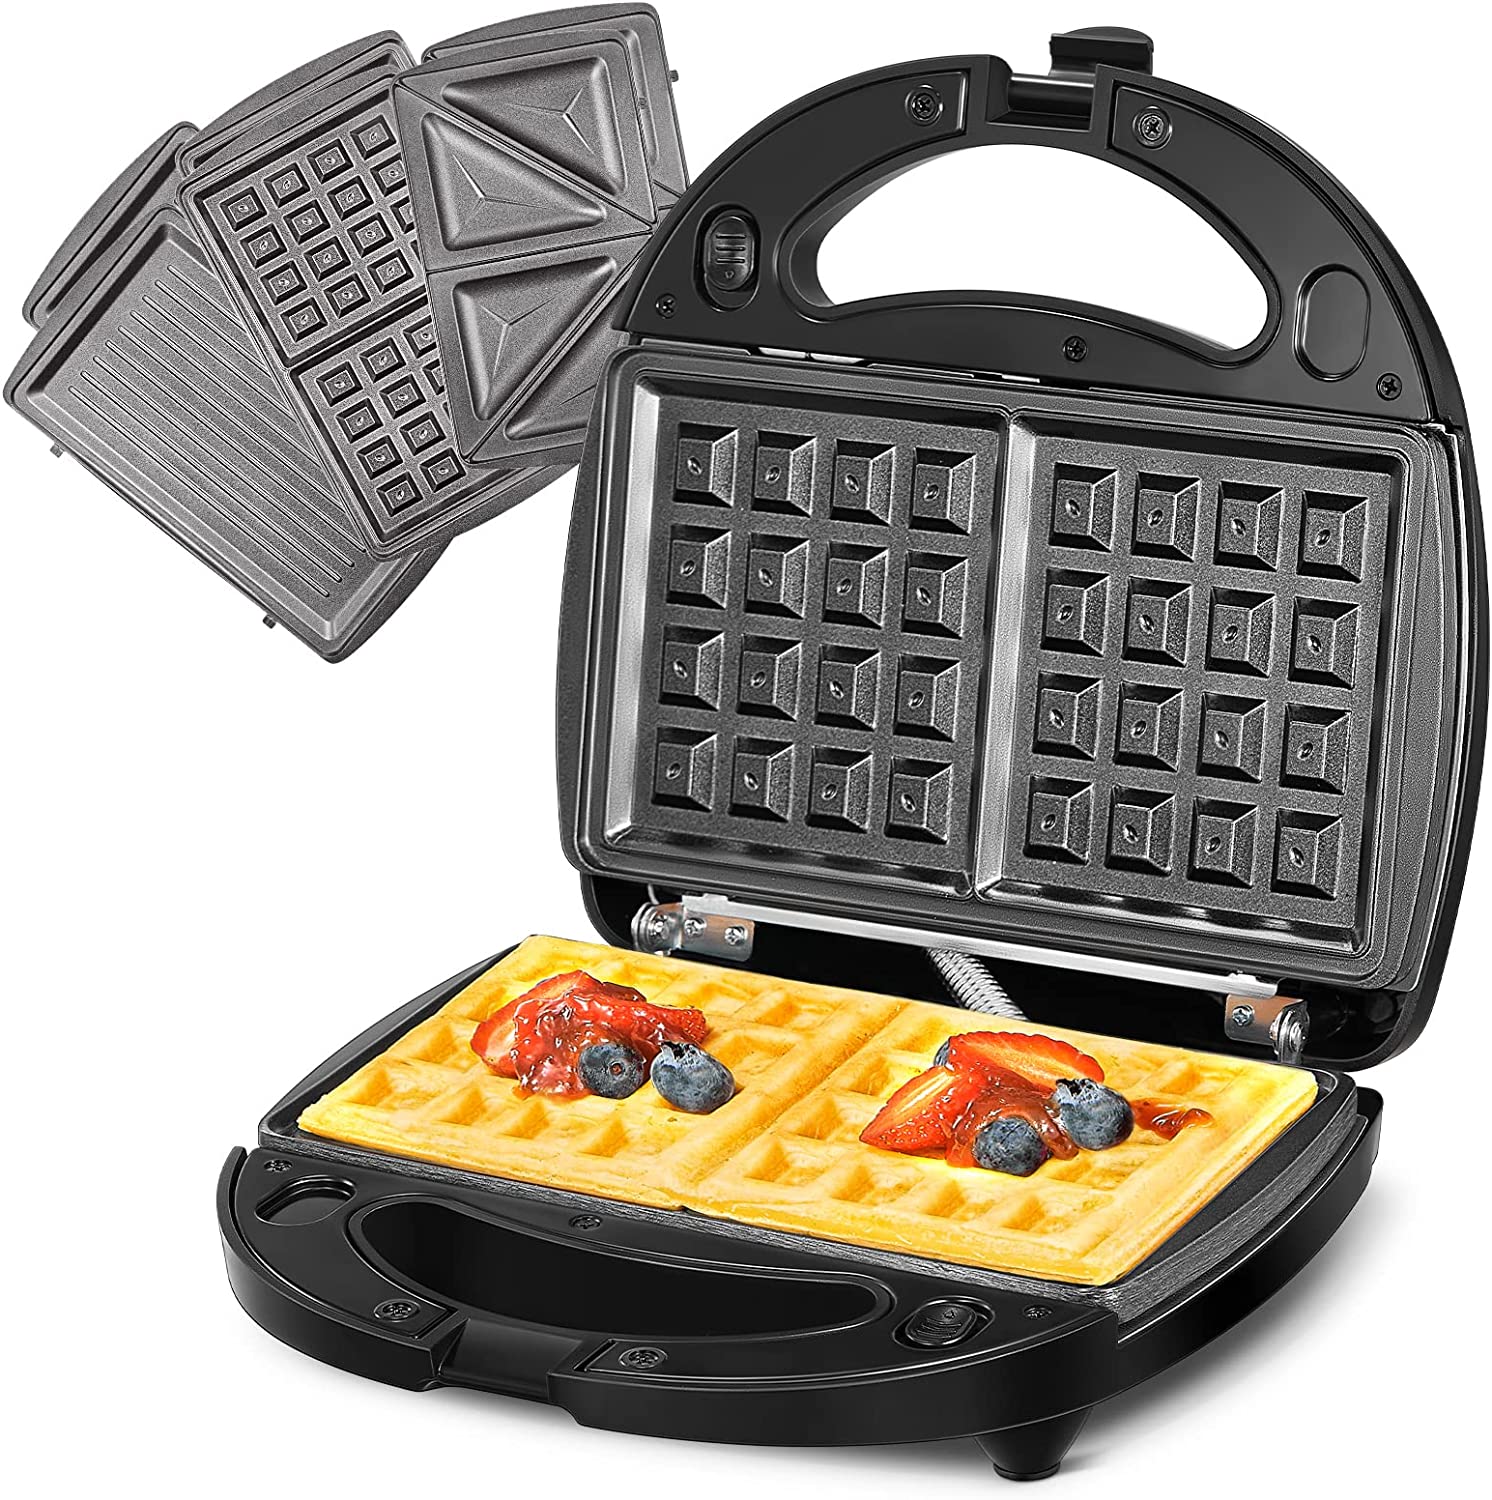 Black 2 in 1 Waffle and Sandwich Maker, Nonstick, Removable Plates - NEW.